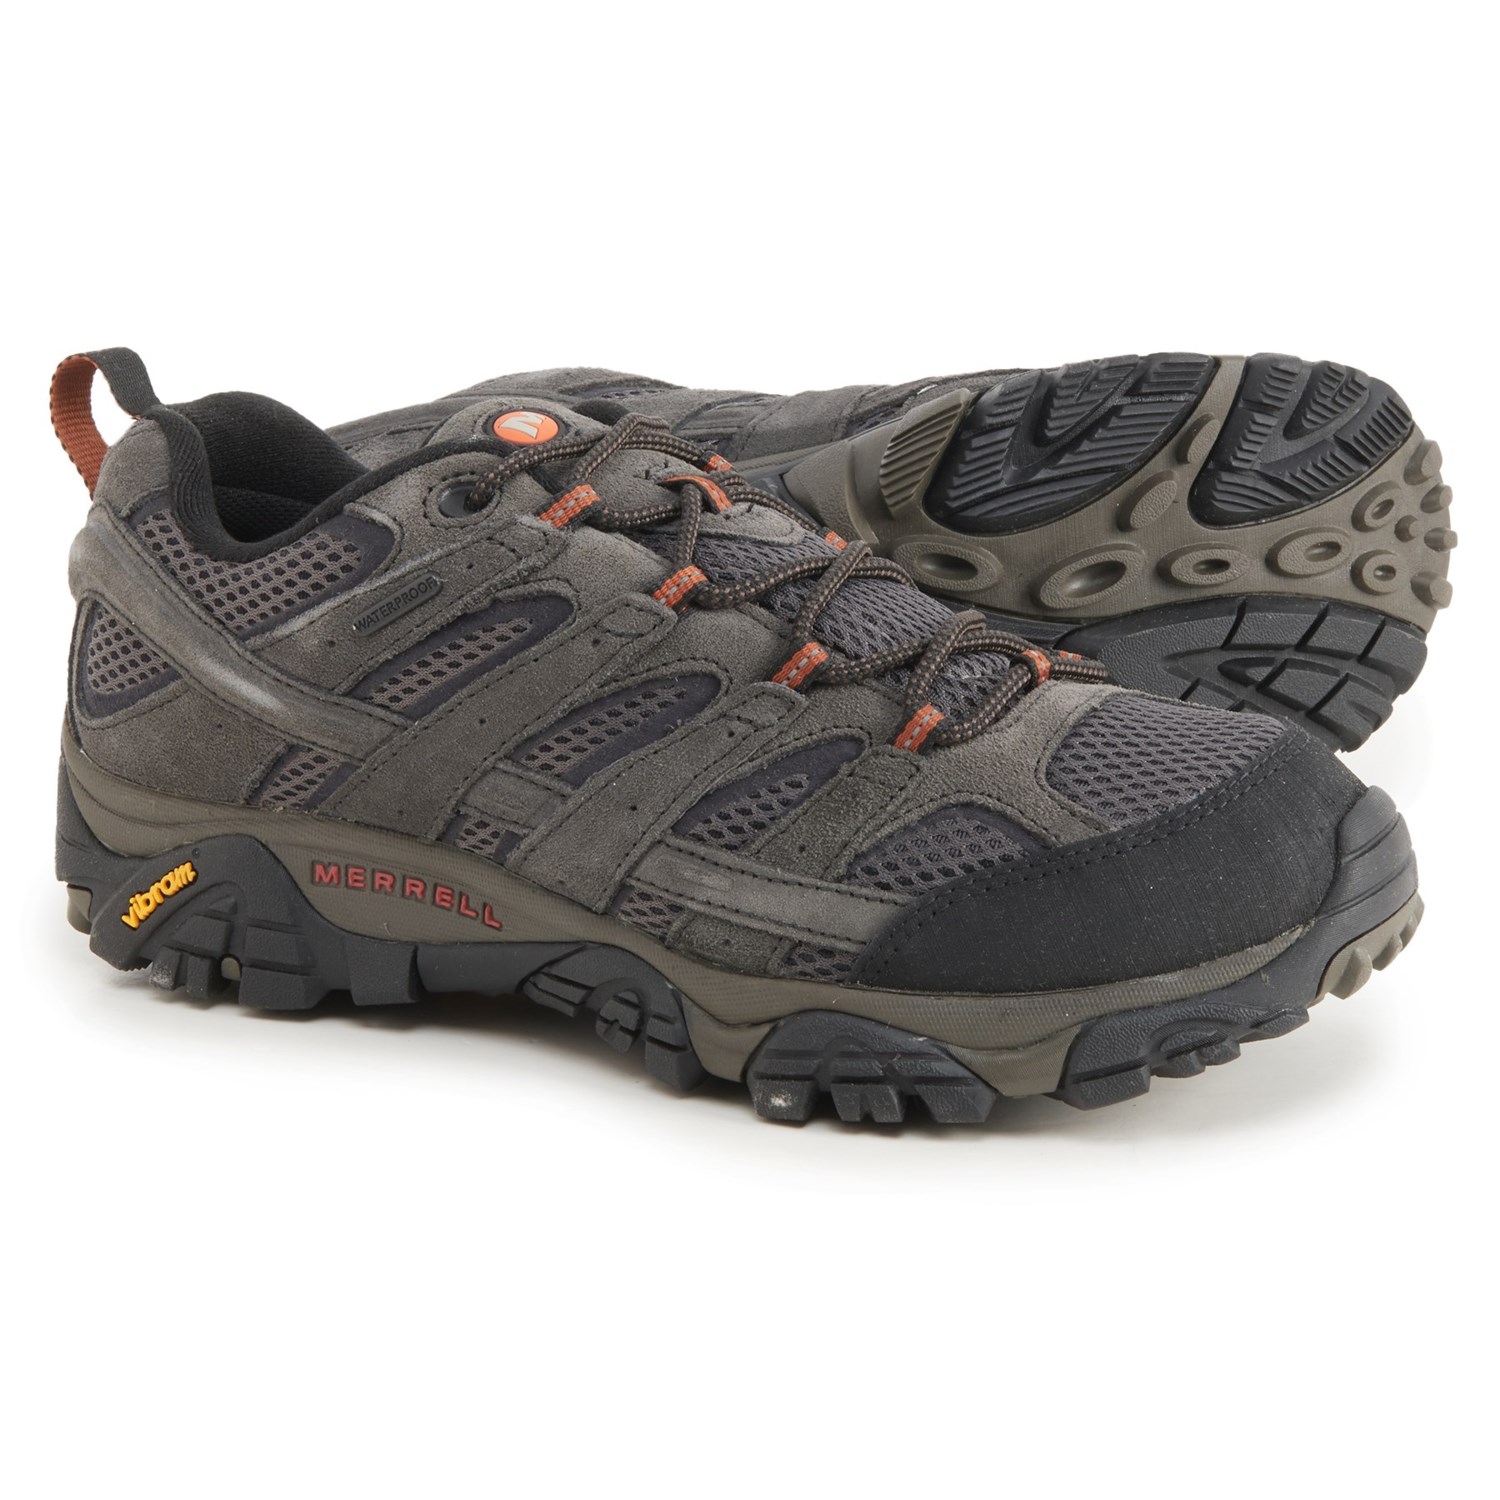 Merrell Moab 2 Hiking Shoes (For Men) - Save 36%